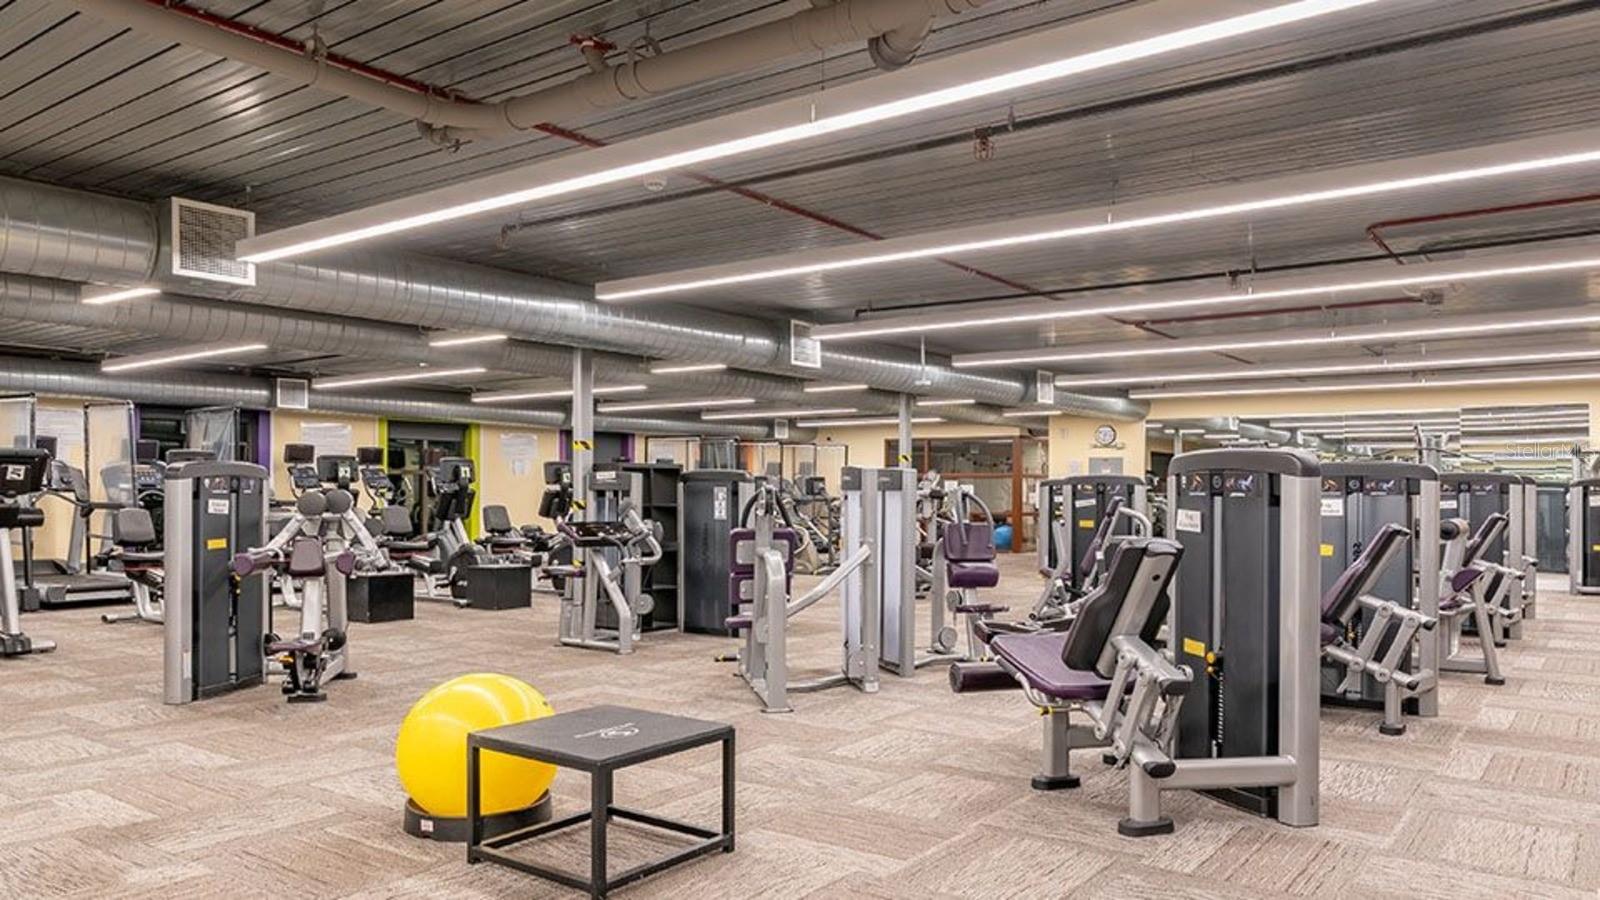 2020 Club State of The Art Fitness